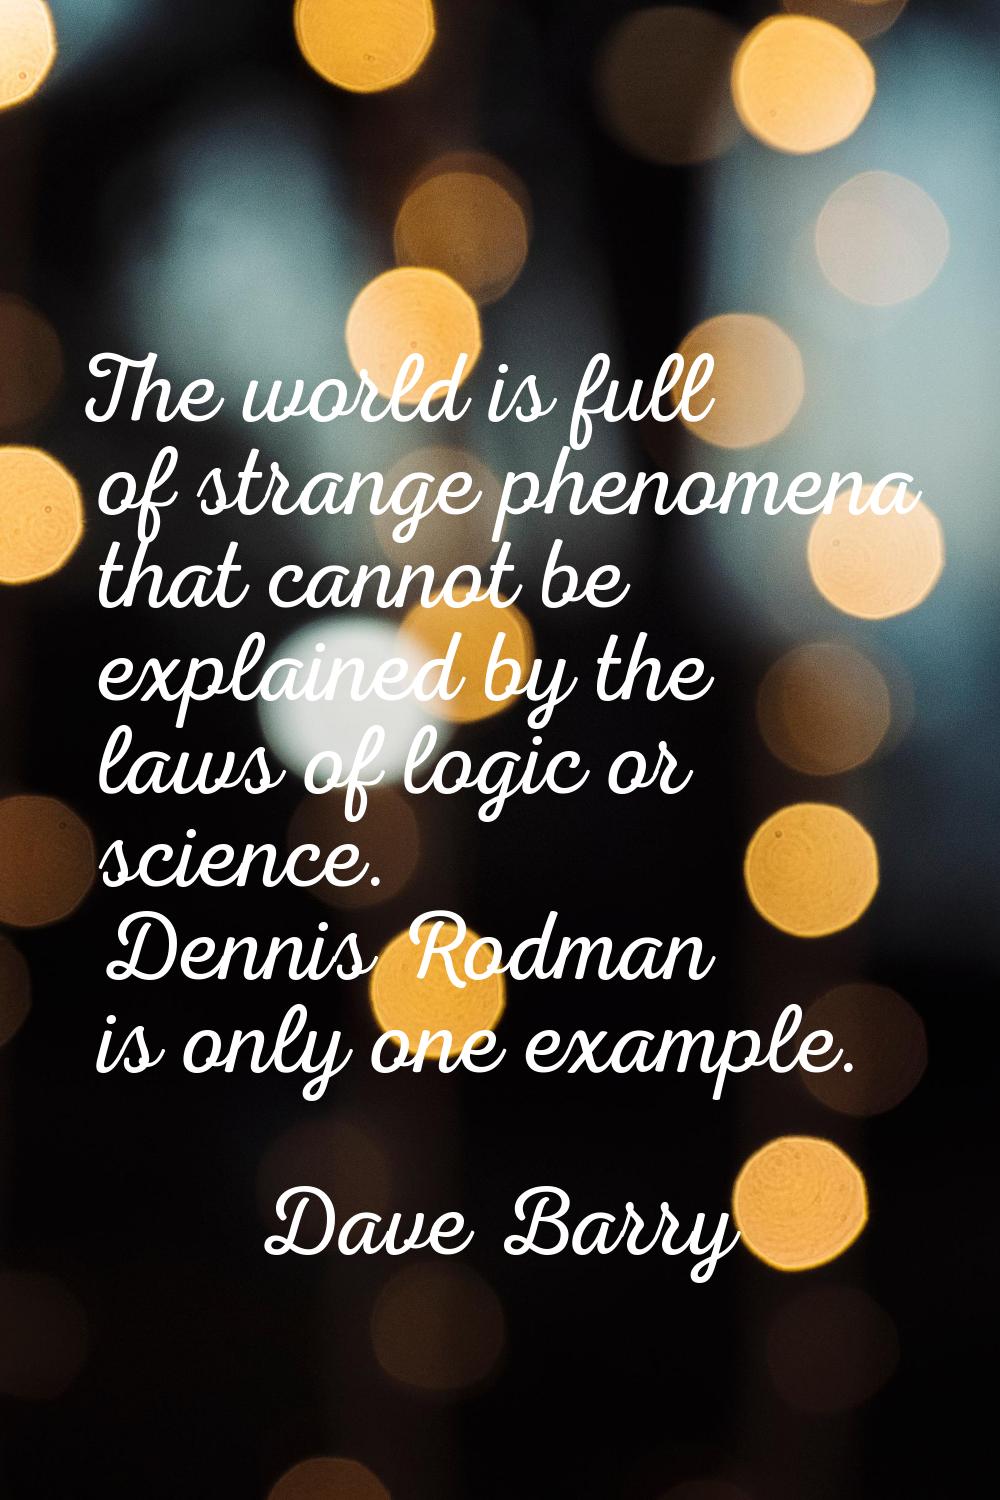 The world is full of strange phenomena that cannot be explained by the laws of logic or science. De